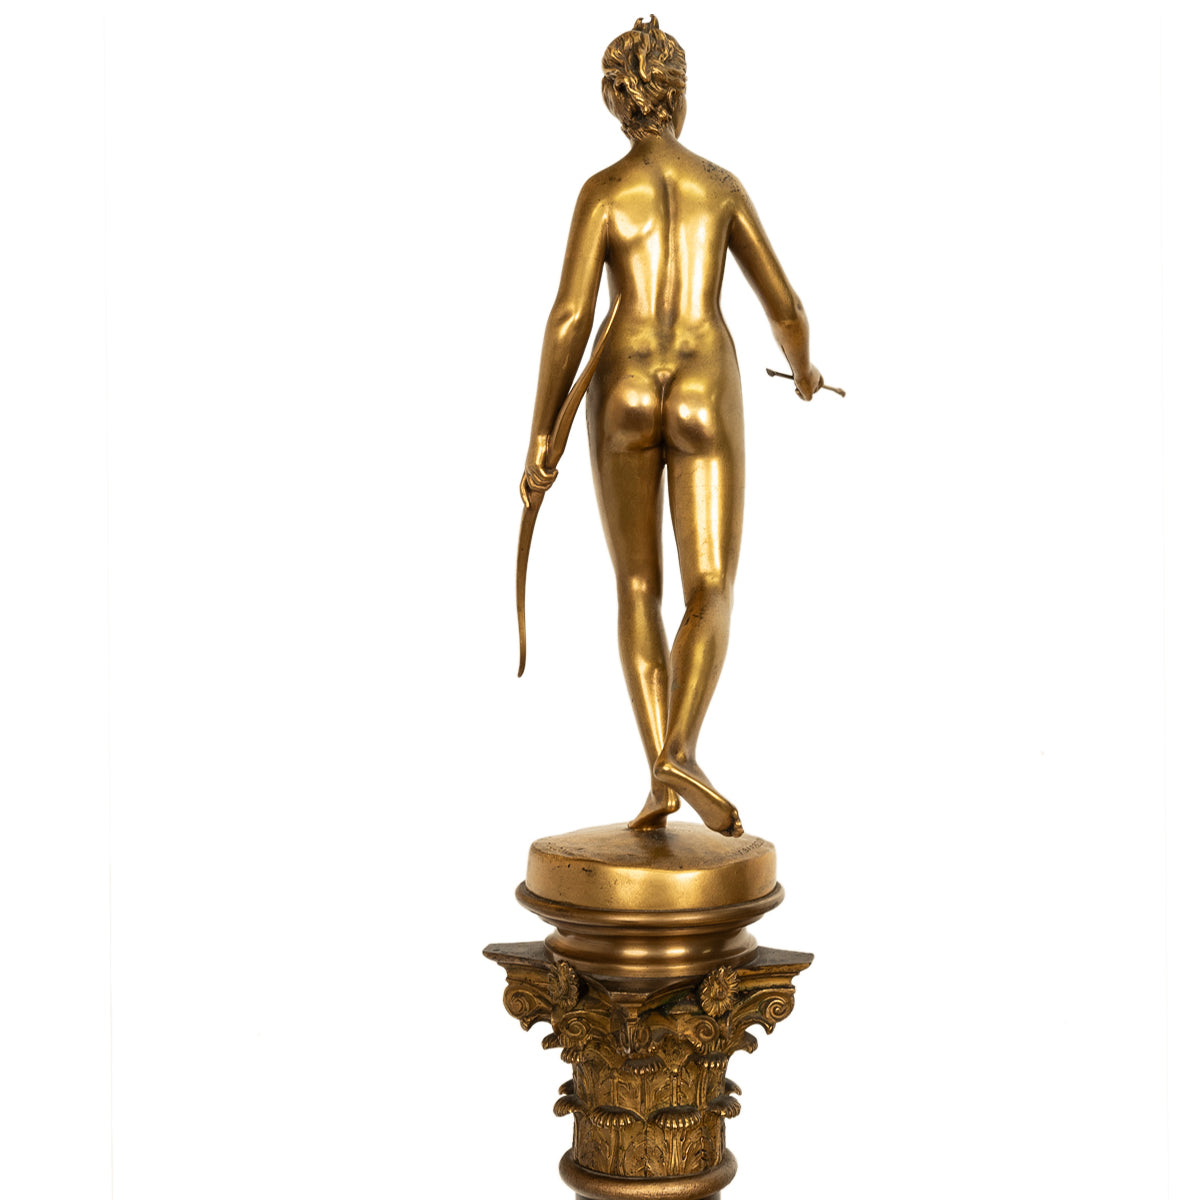 Antique 34" tall French Grand Tour Gilt Bronze Statue on Column Diana the Huntress F. Barbedienne 1838